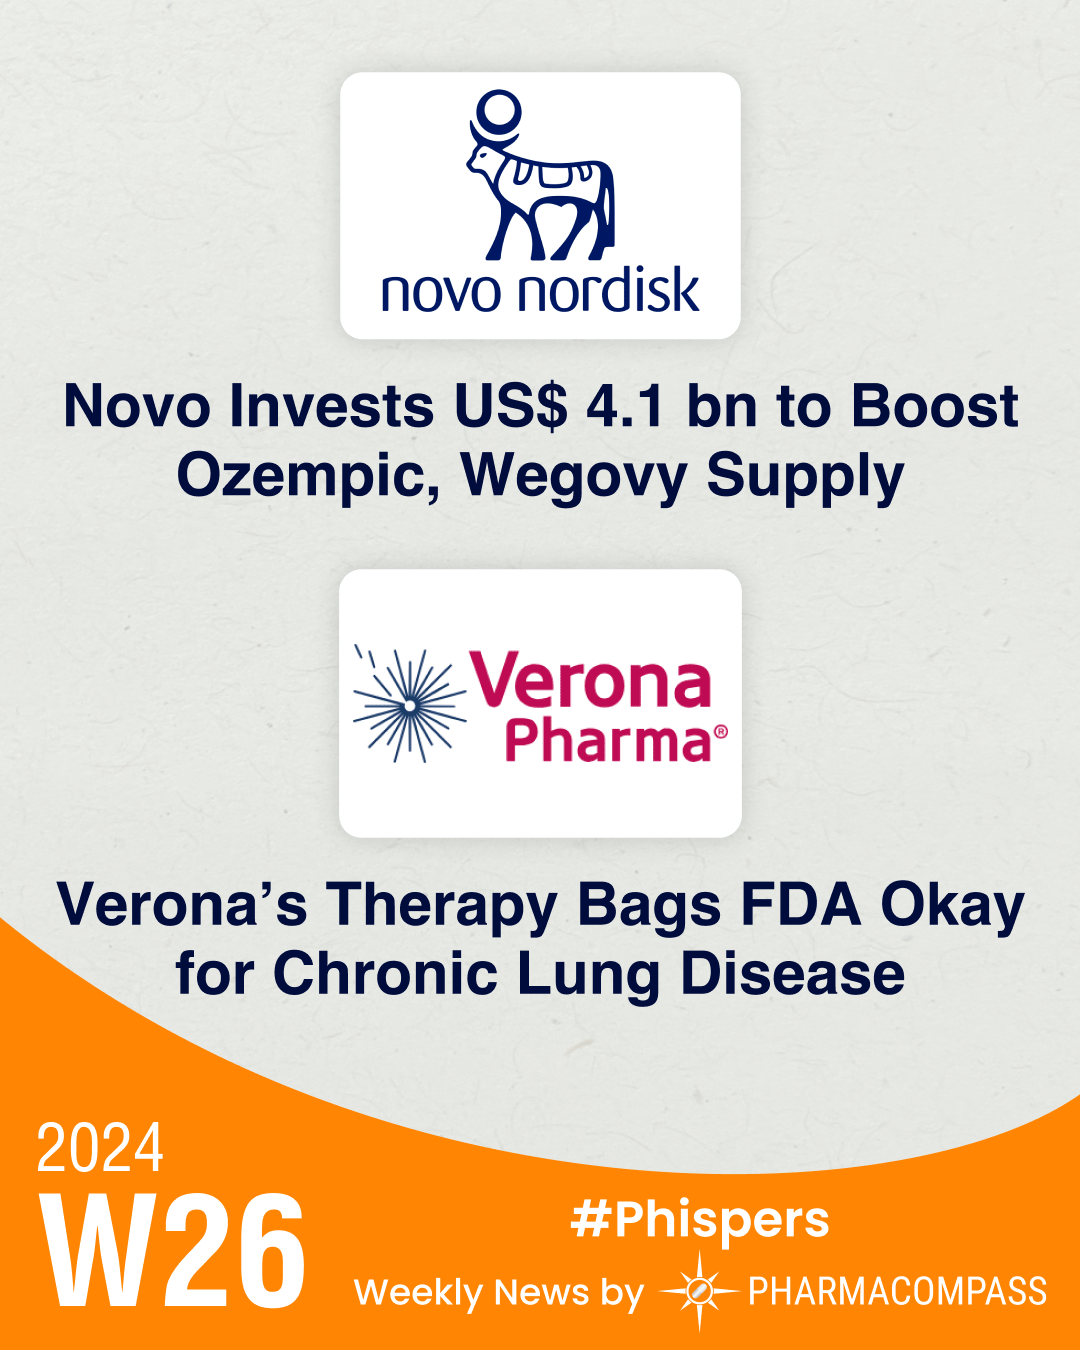 Novo invests US$ 4.1 bn to boost Wegovy, Ozempic supply; Verona’s COPD therapy bags FDA nod